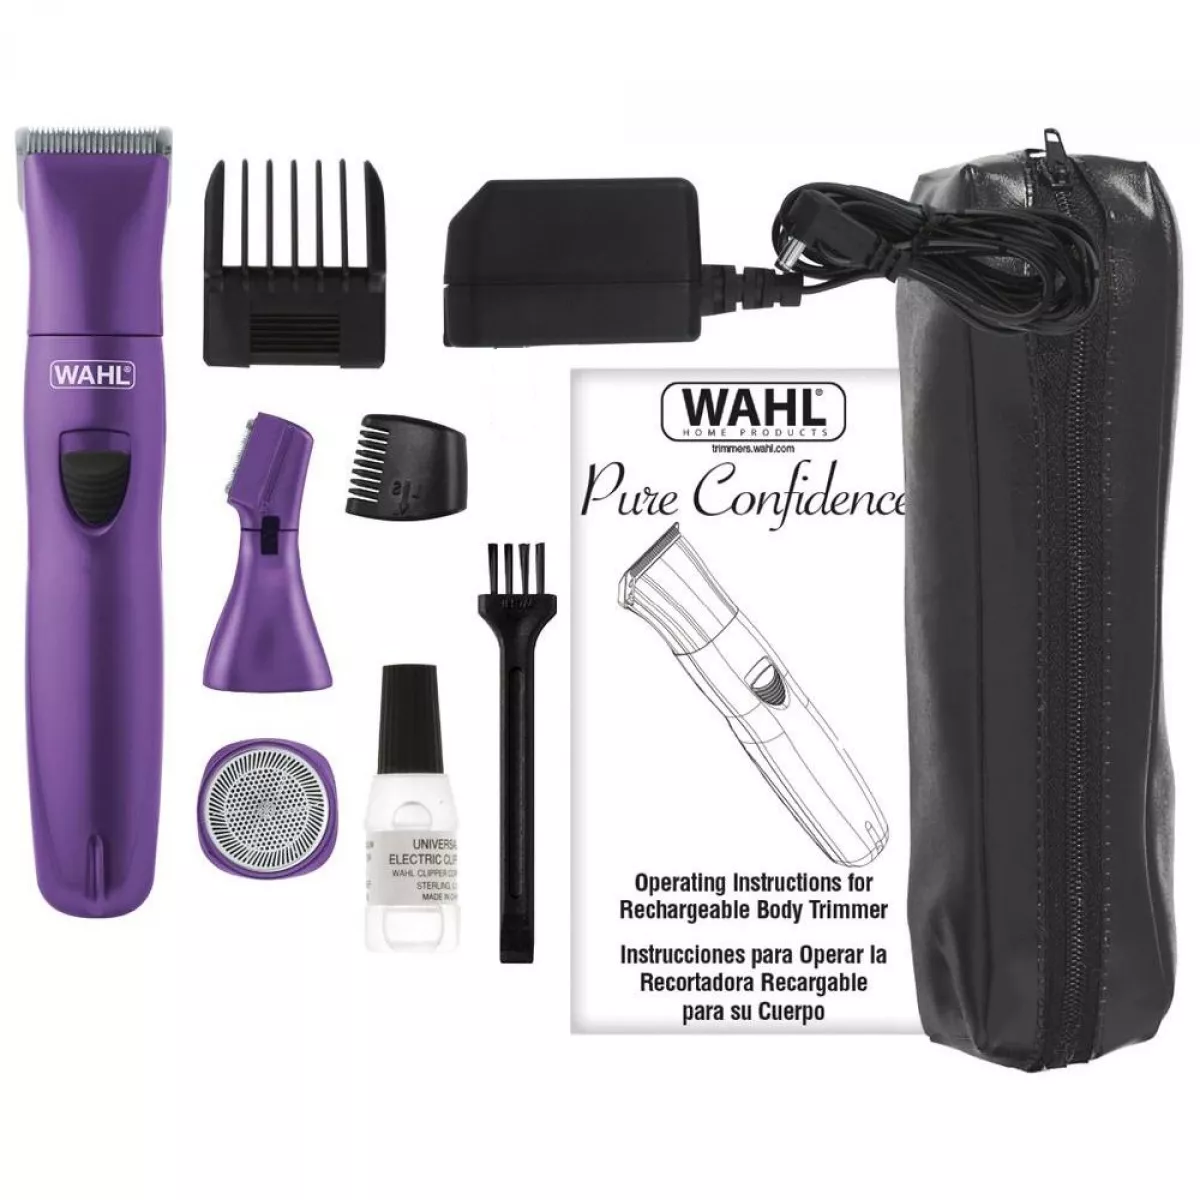 Ladytrimmer Wahl Lady Trimmer Pure Confidence 9865-116